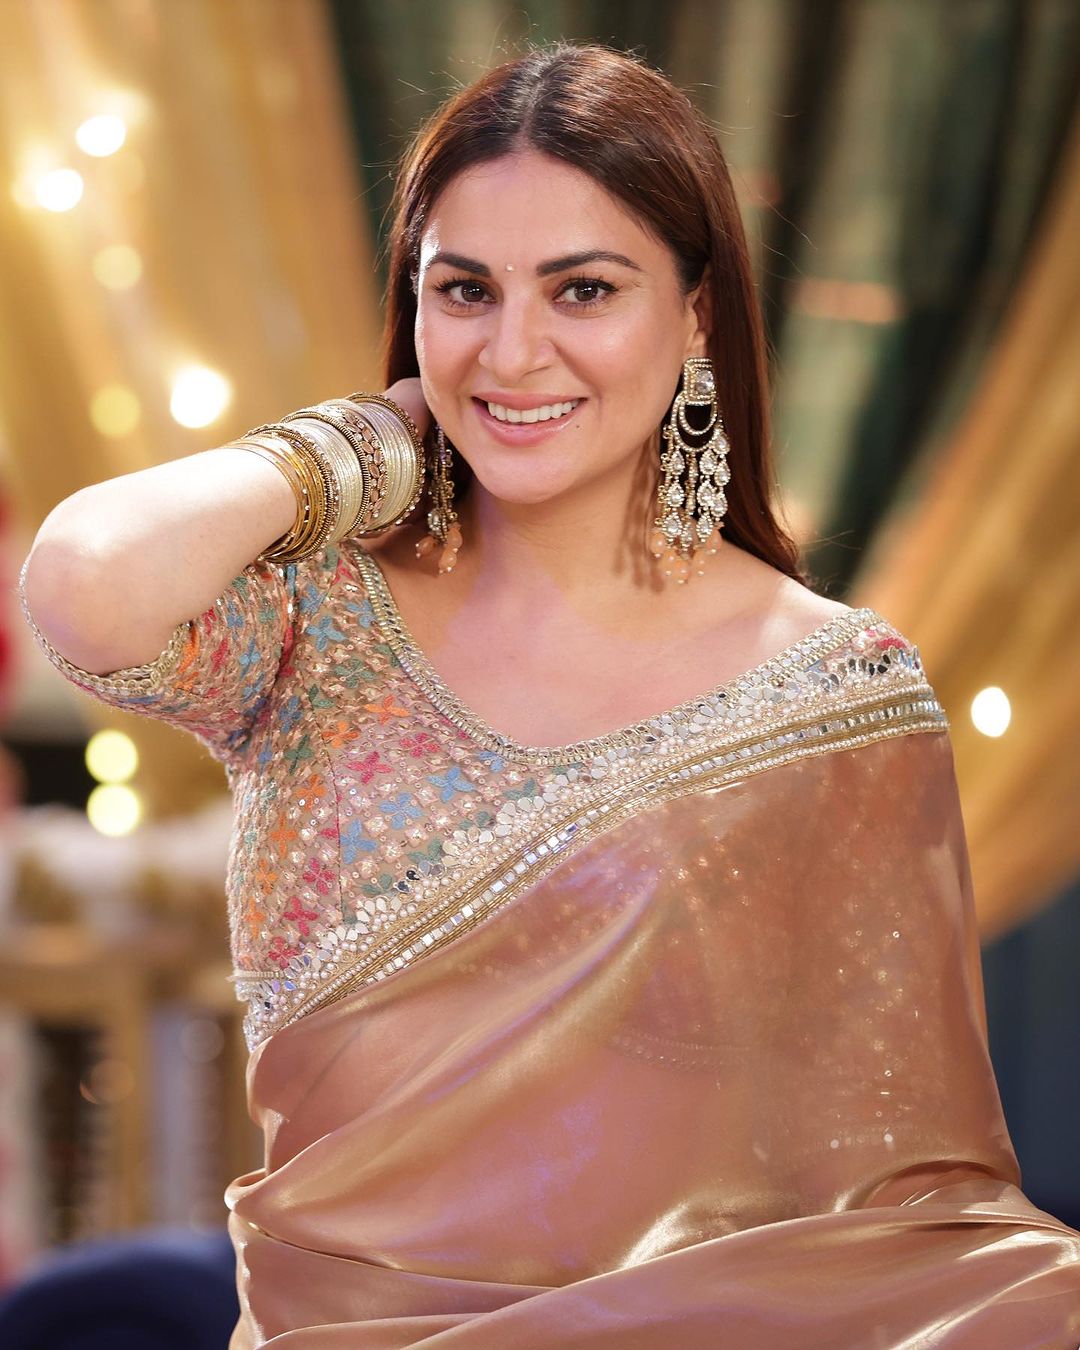 Kundali Bhagya’s Shraddha Arya Left Fans In Stitches With Her Hilarious Reel! Check It Out!